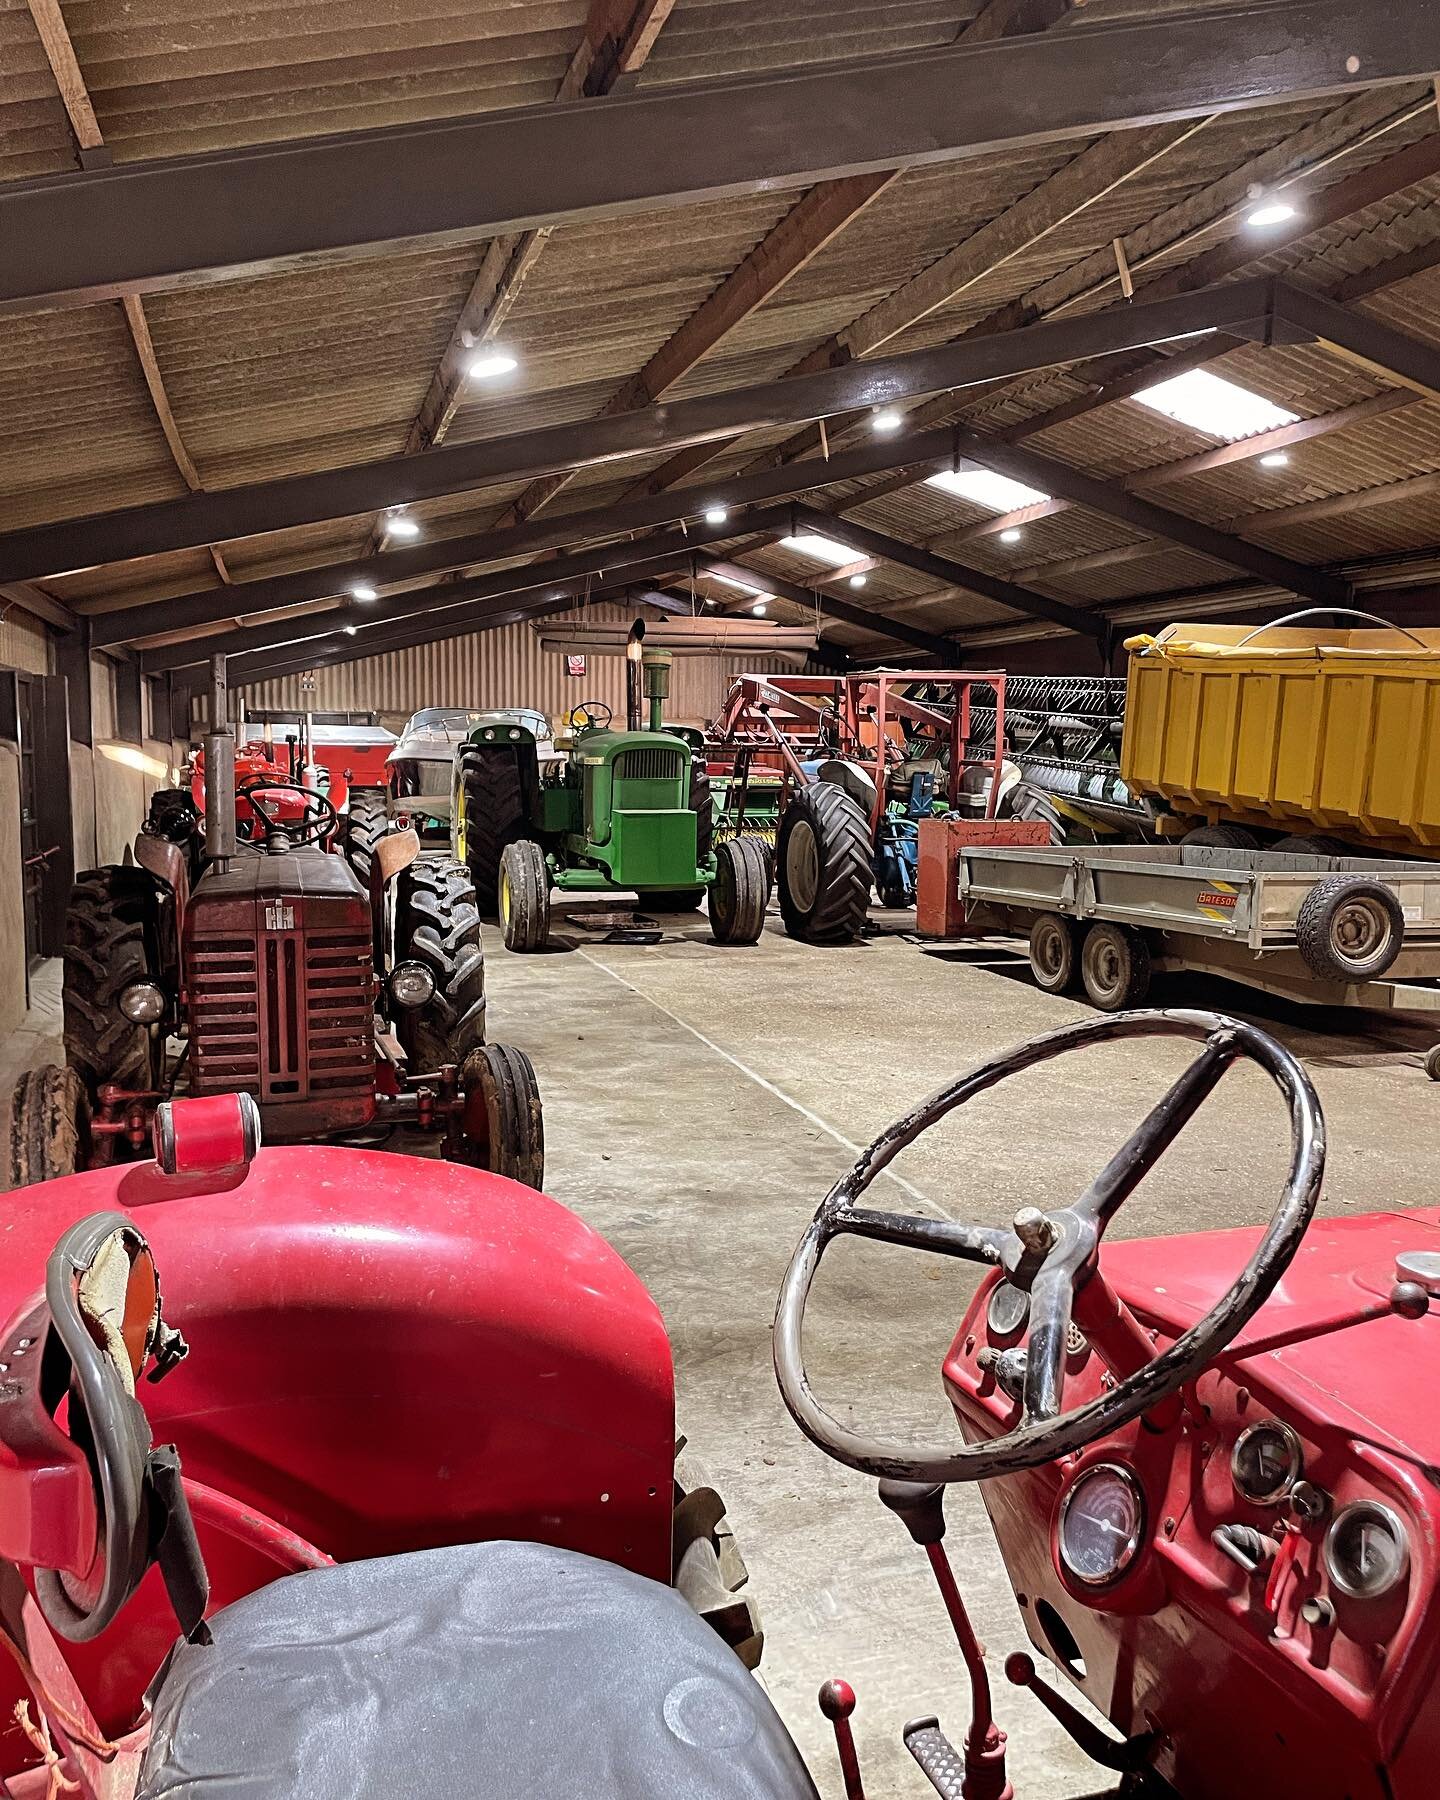 The barn has now gone into hibernation for the winter! No parties for a few months, just farm machinery resting for the winter. 🚜😴🚜